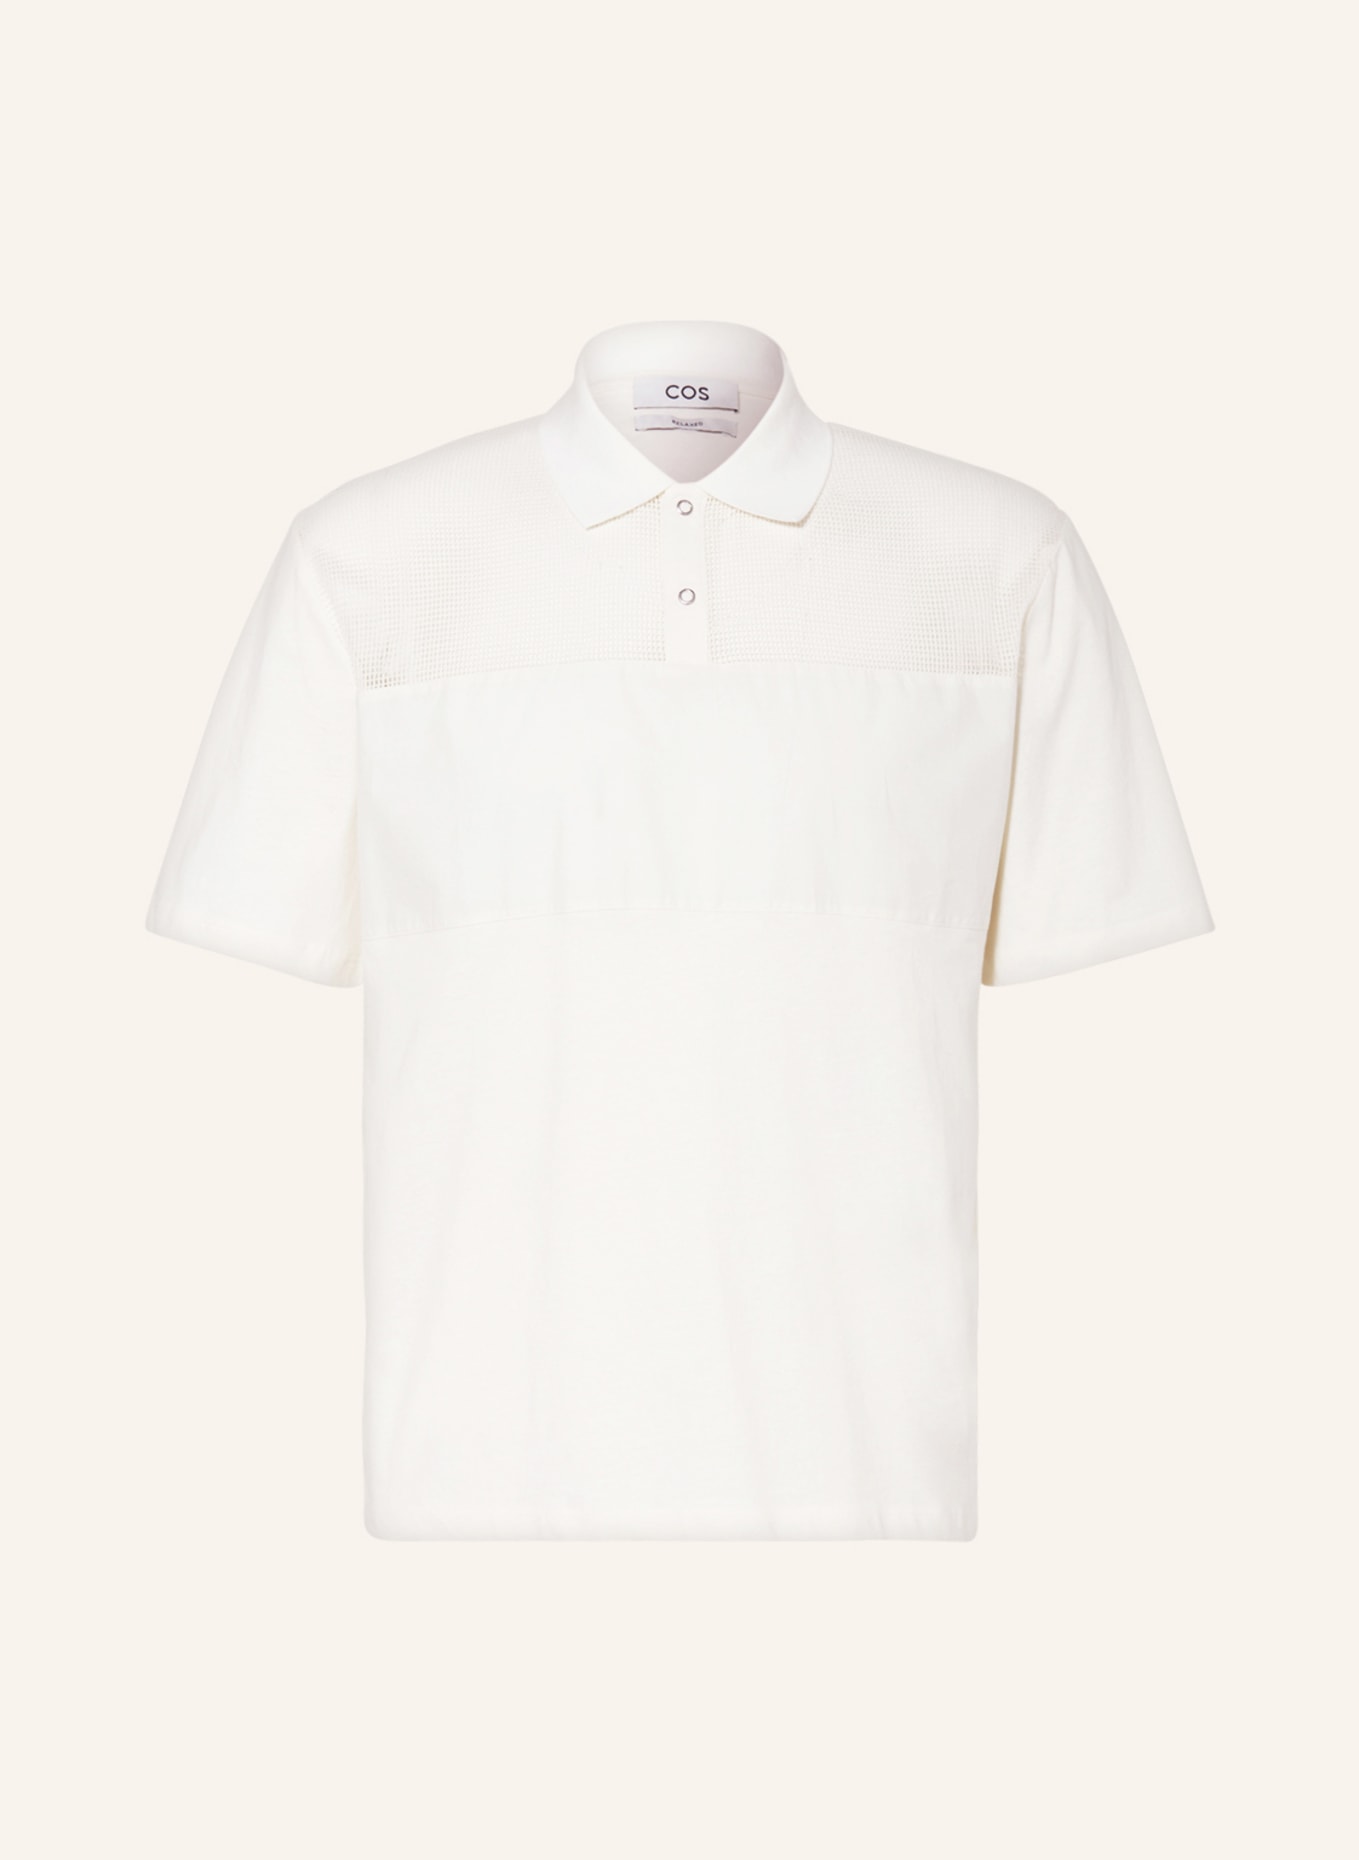 COS Jersey polo shirt relaxed fit, Color: ECRU (Image 1)